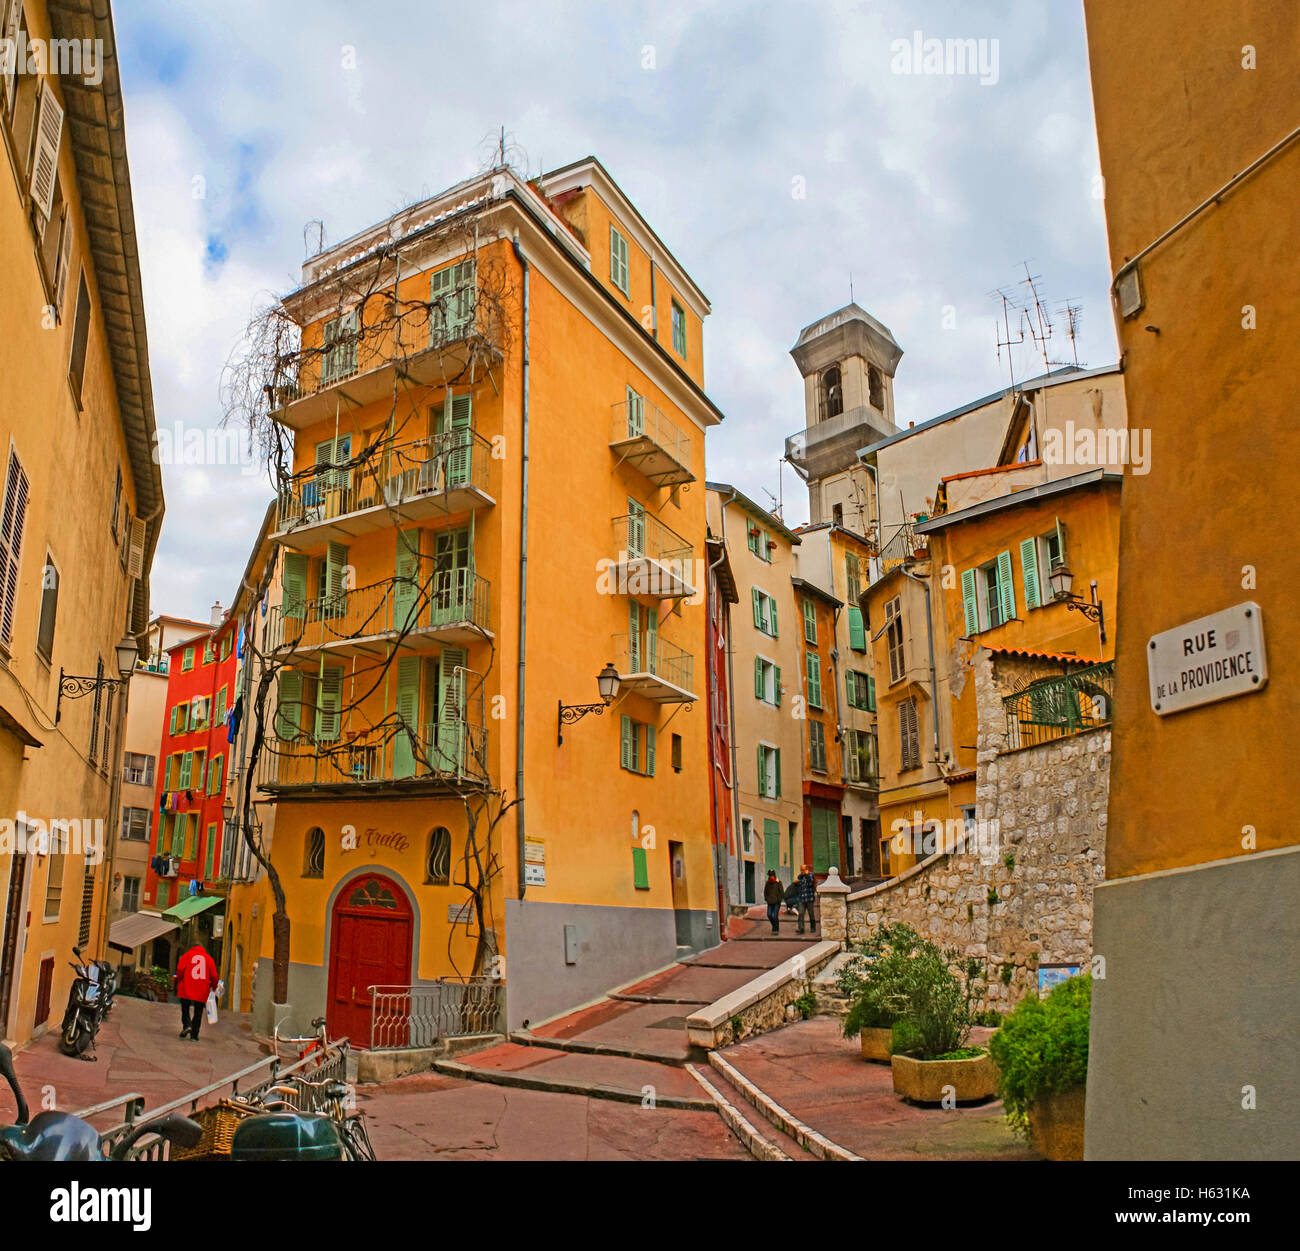 The pleasant walk through the labyrinth of the old quarters with the unusual colorful houses Stock Photo